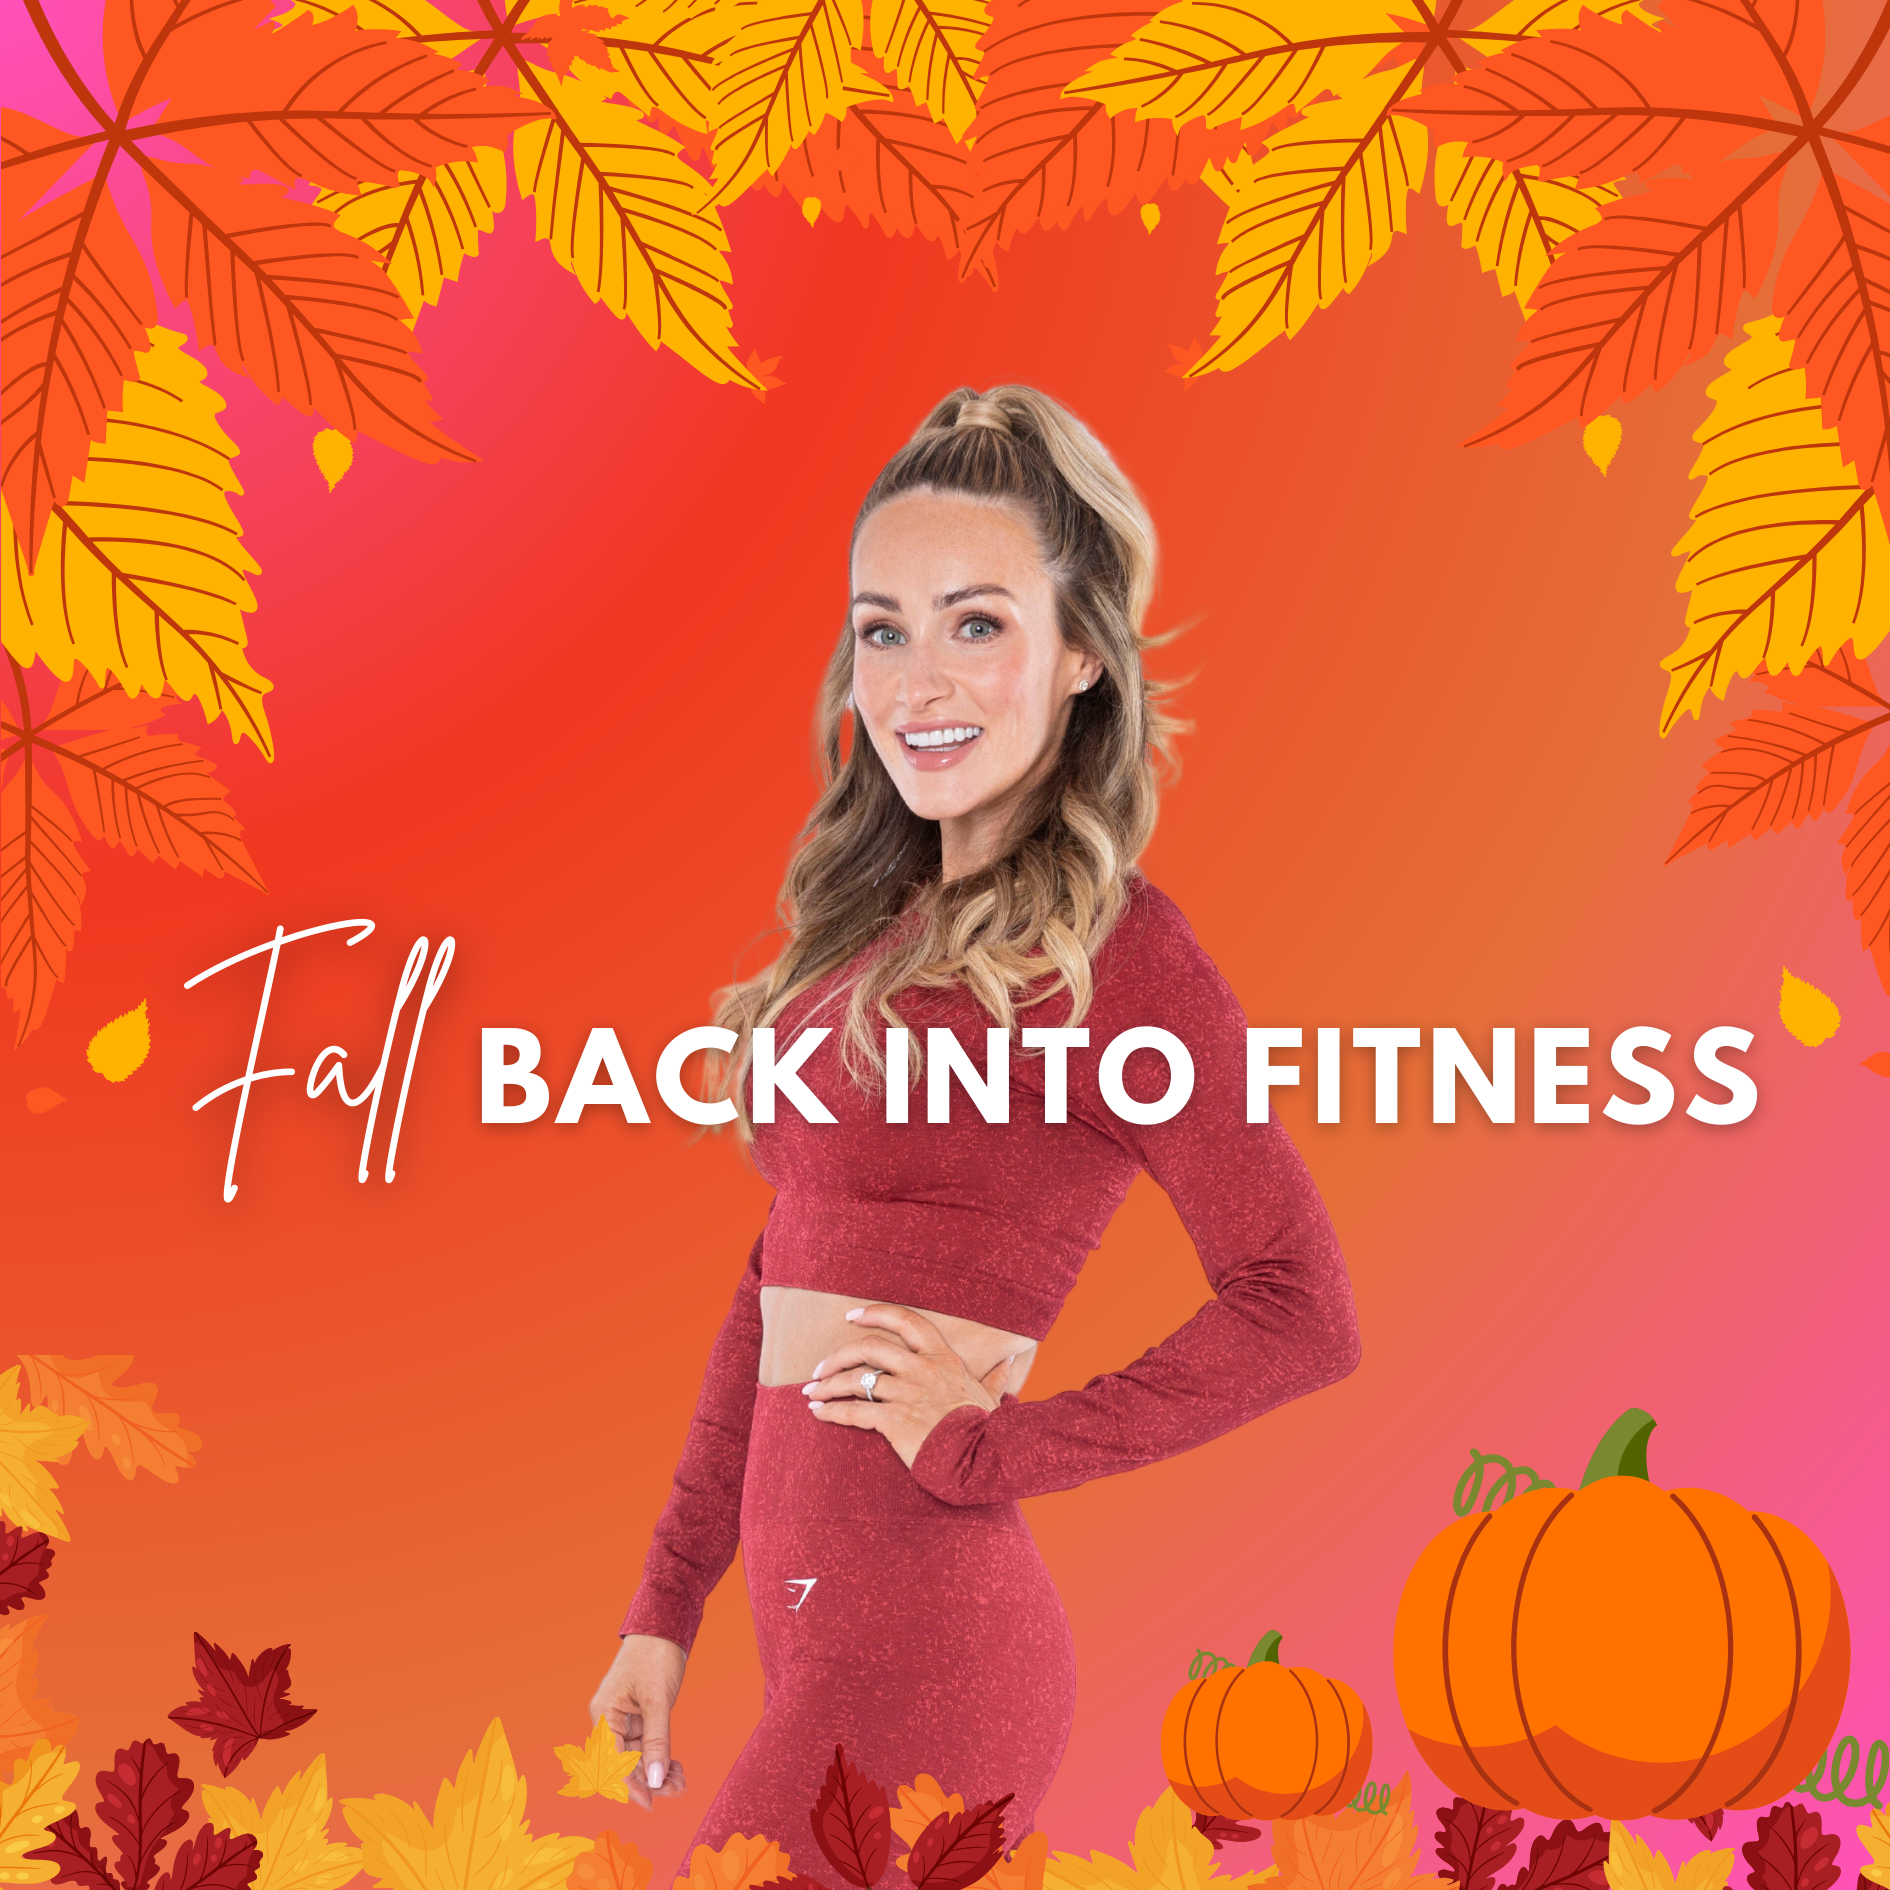 Fall Back into Fitness: How To Get Back Into Routine After Taking a Break